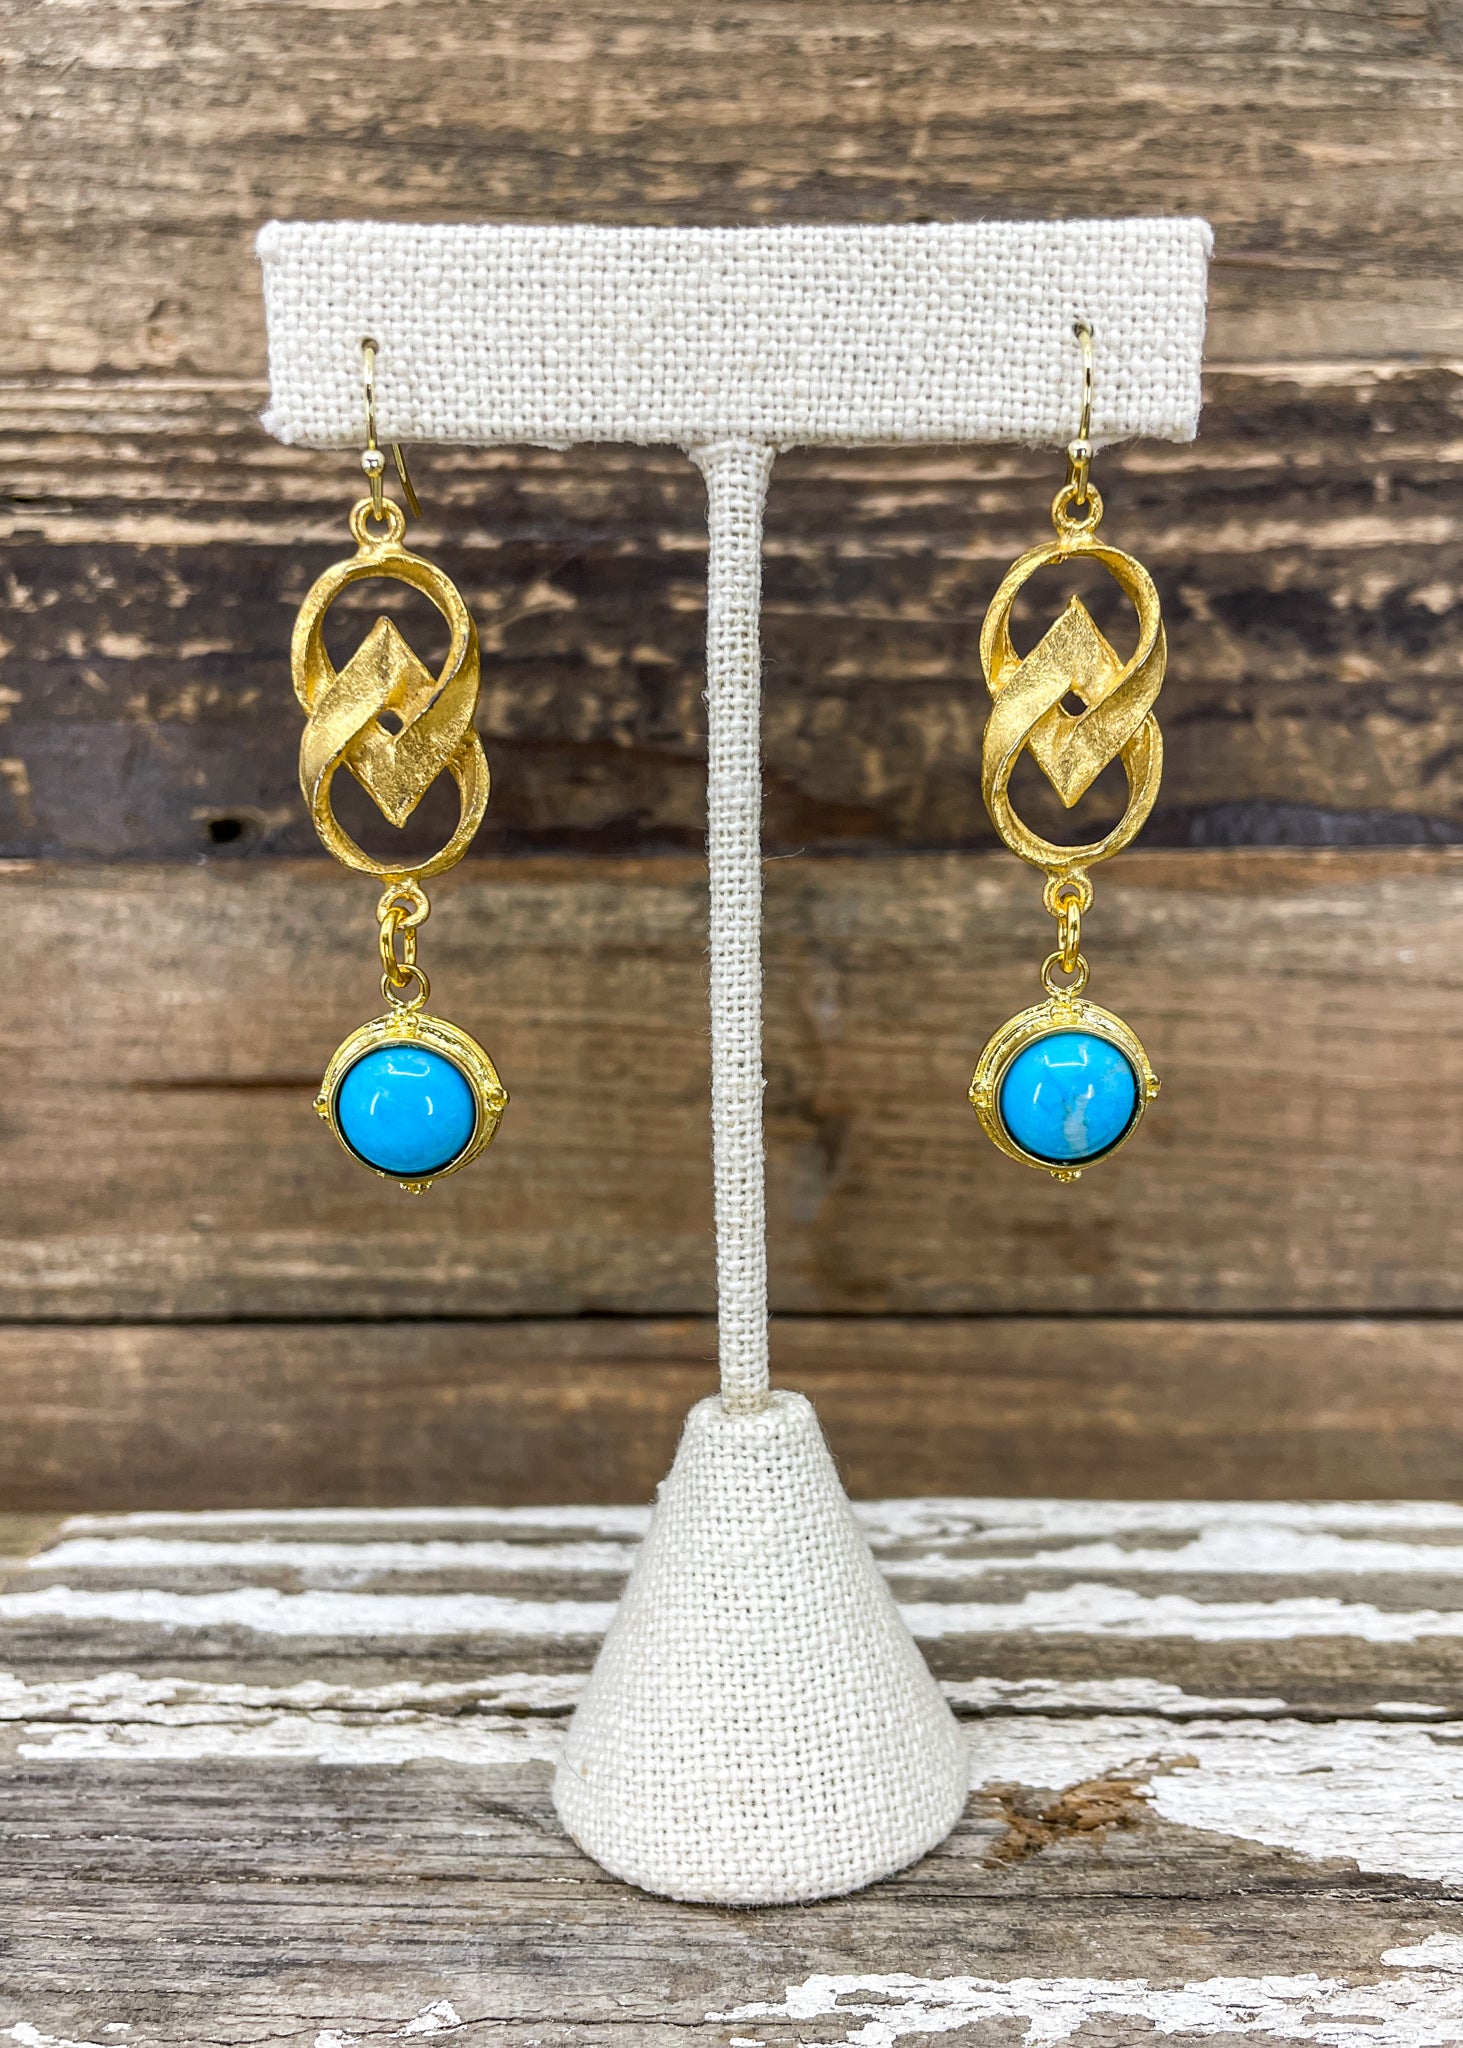 Vintage Gold & Turquoise Earrings